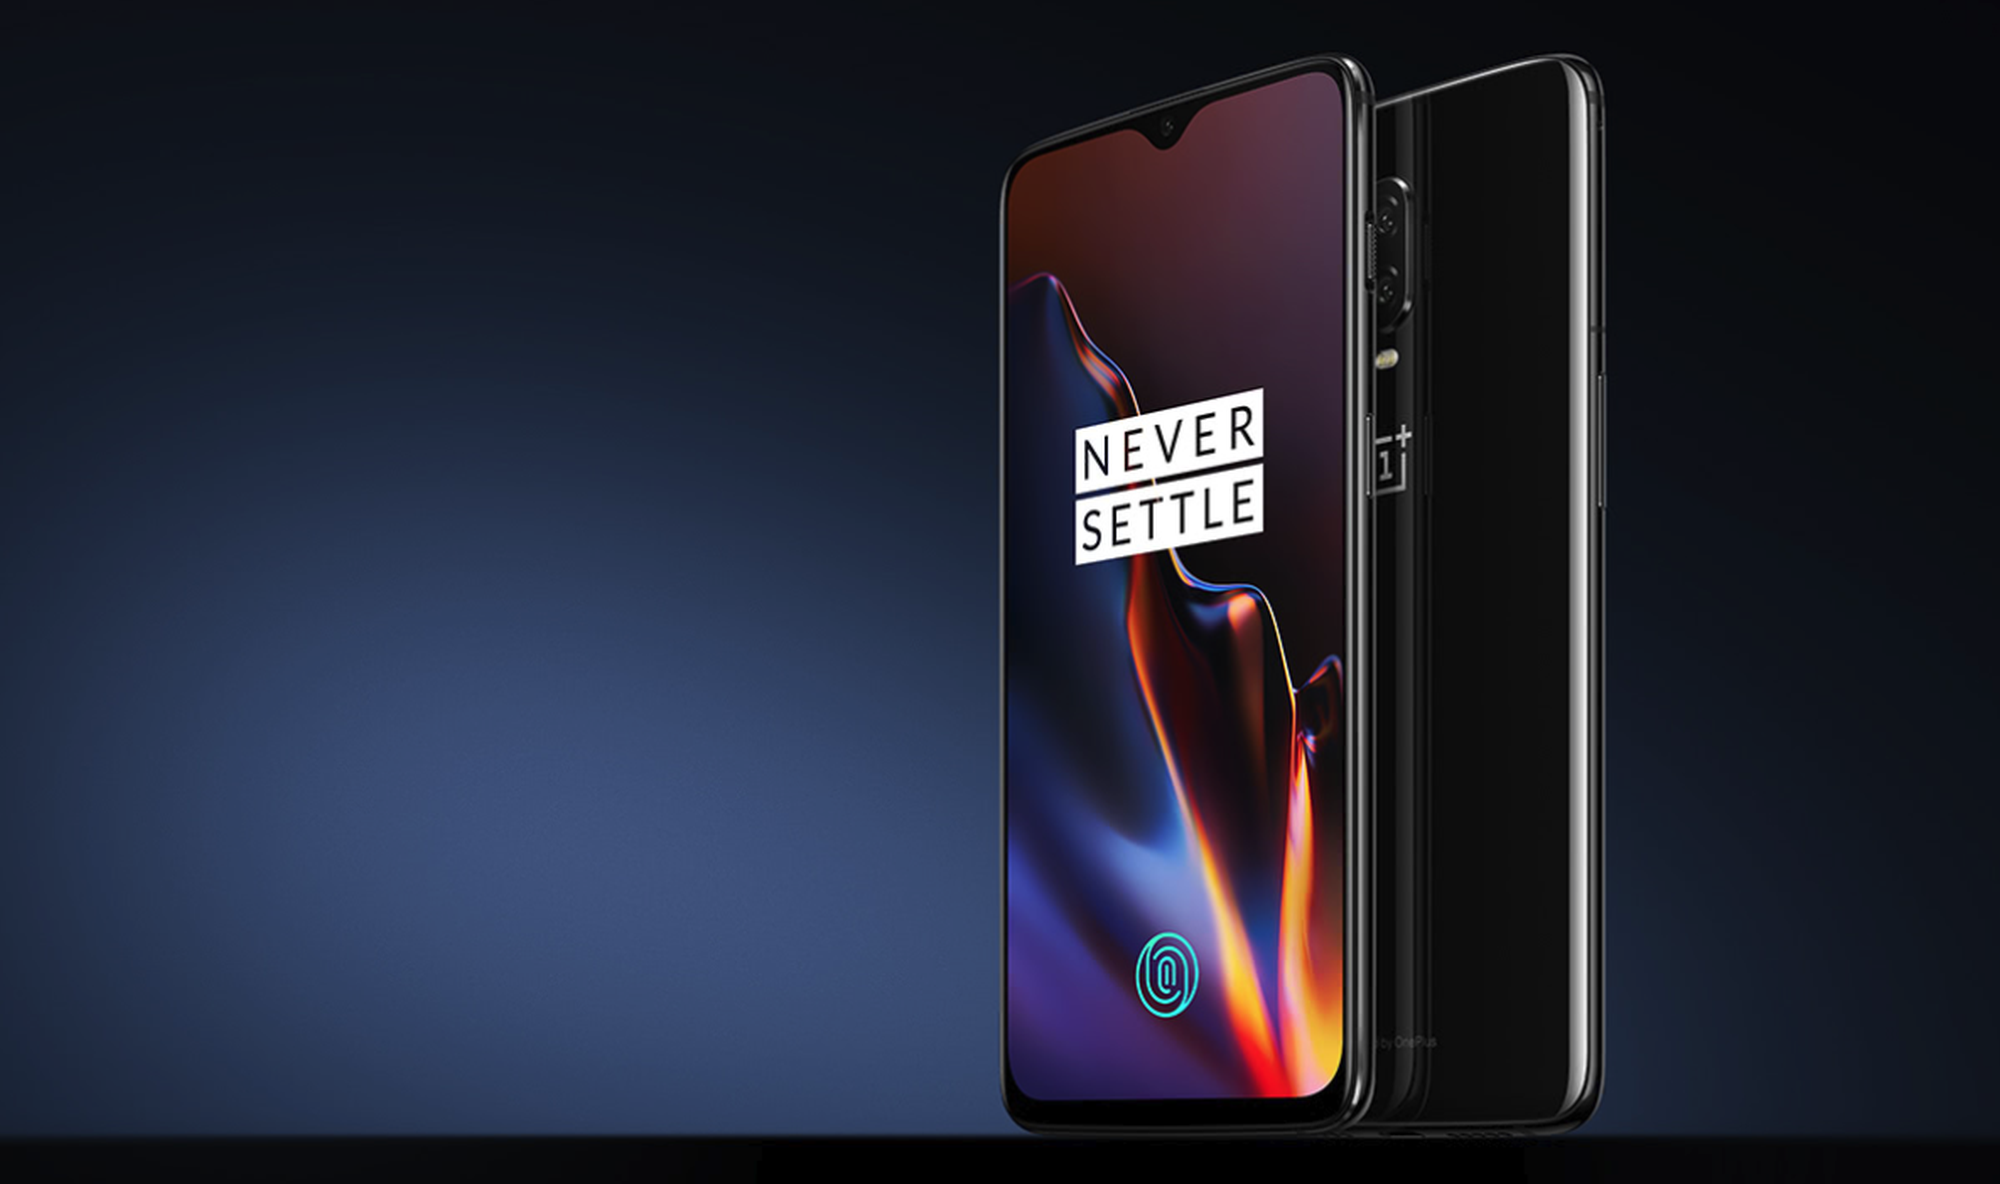 Why buy OnePlus 6T over Honor 10